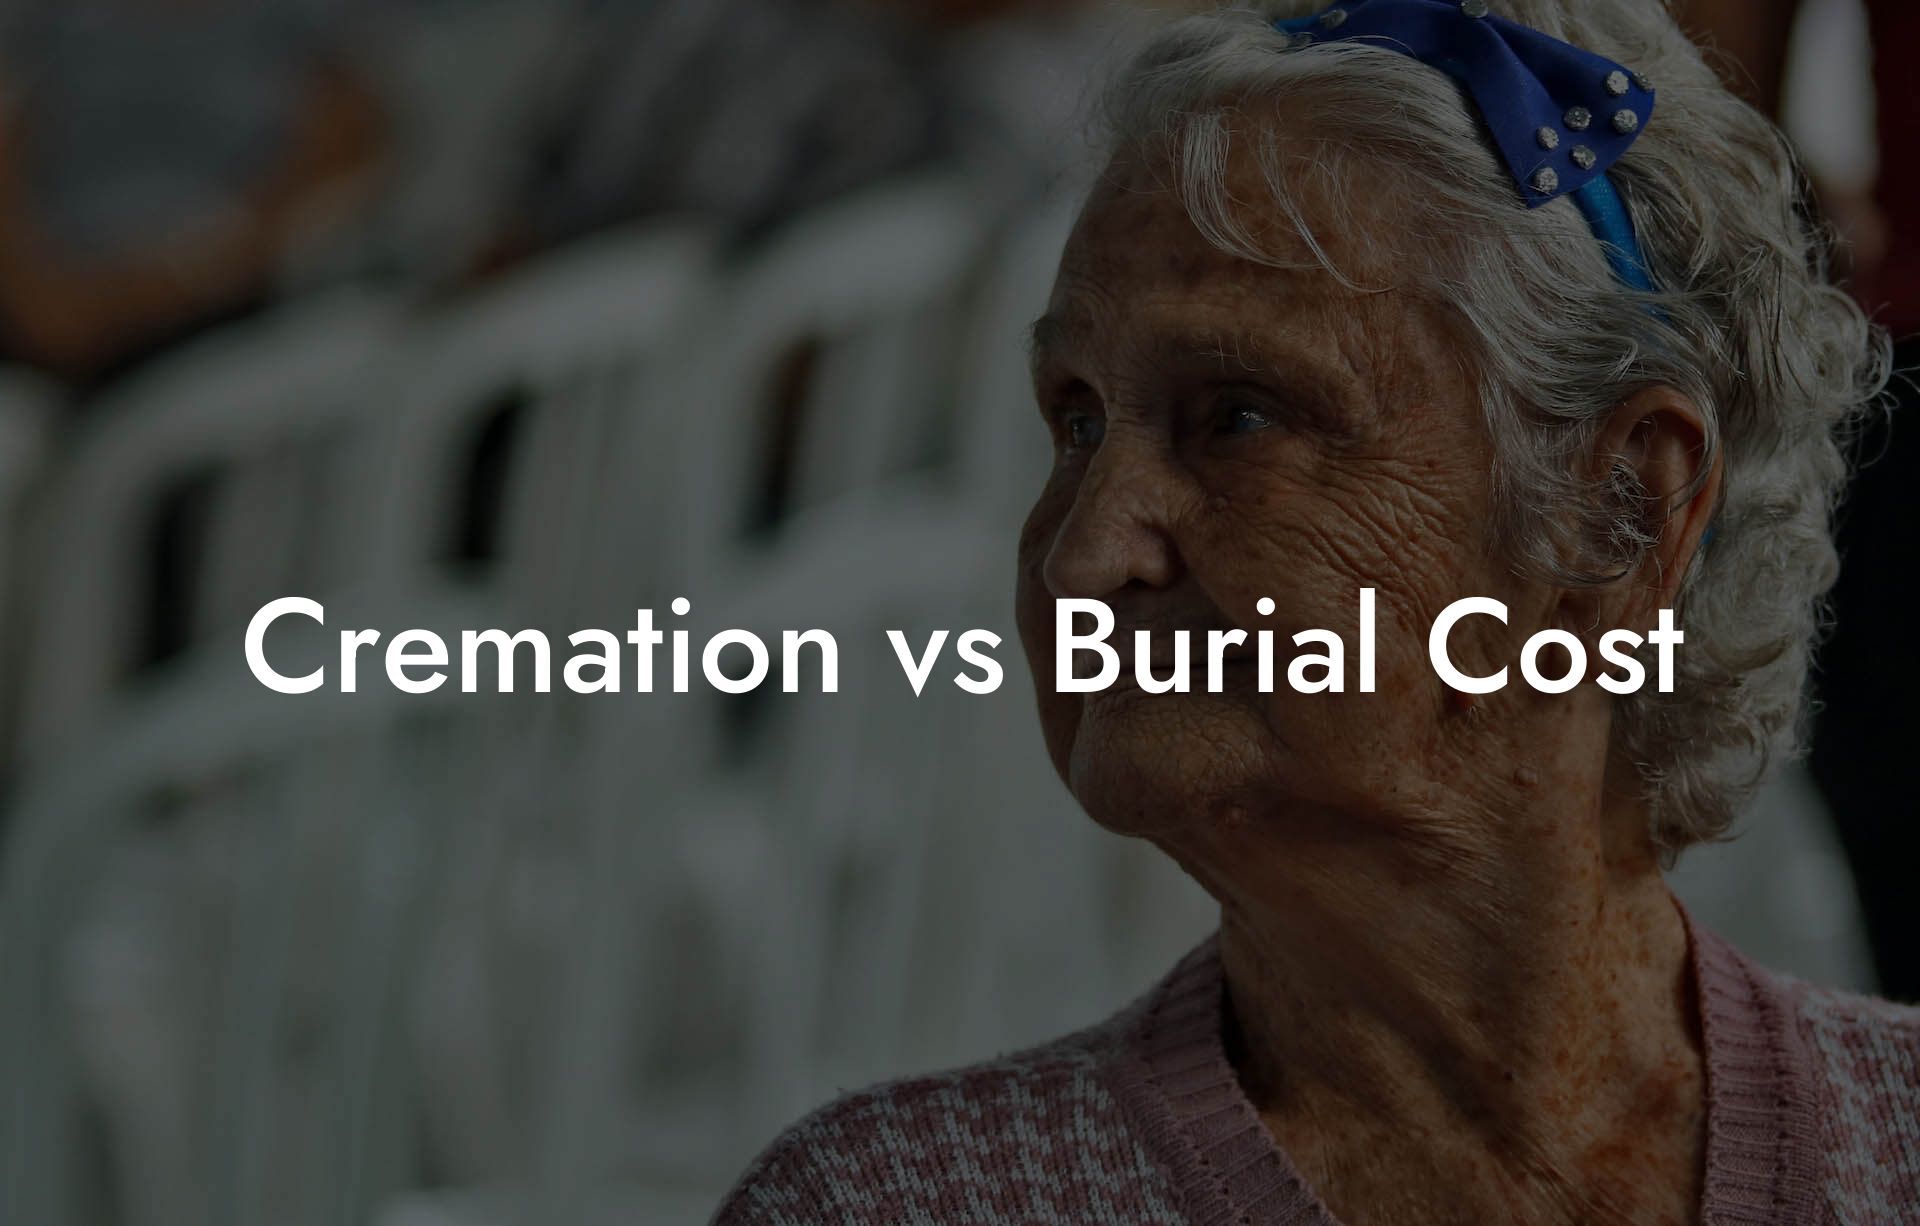 Cremation vs Burial Cost